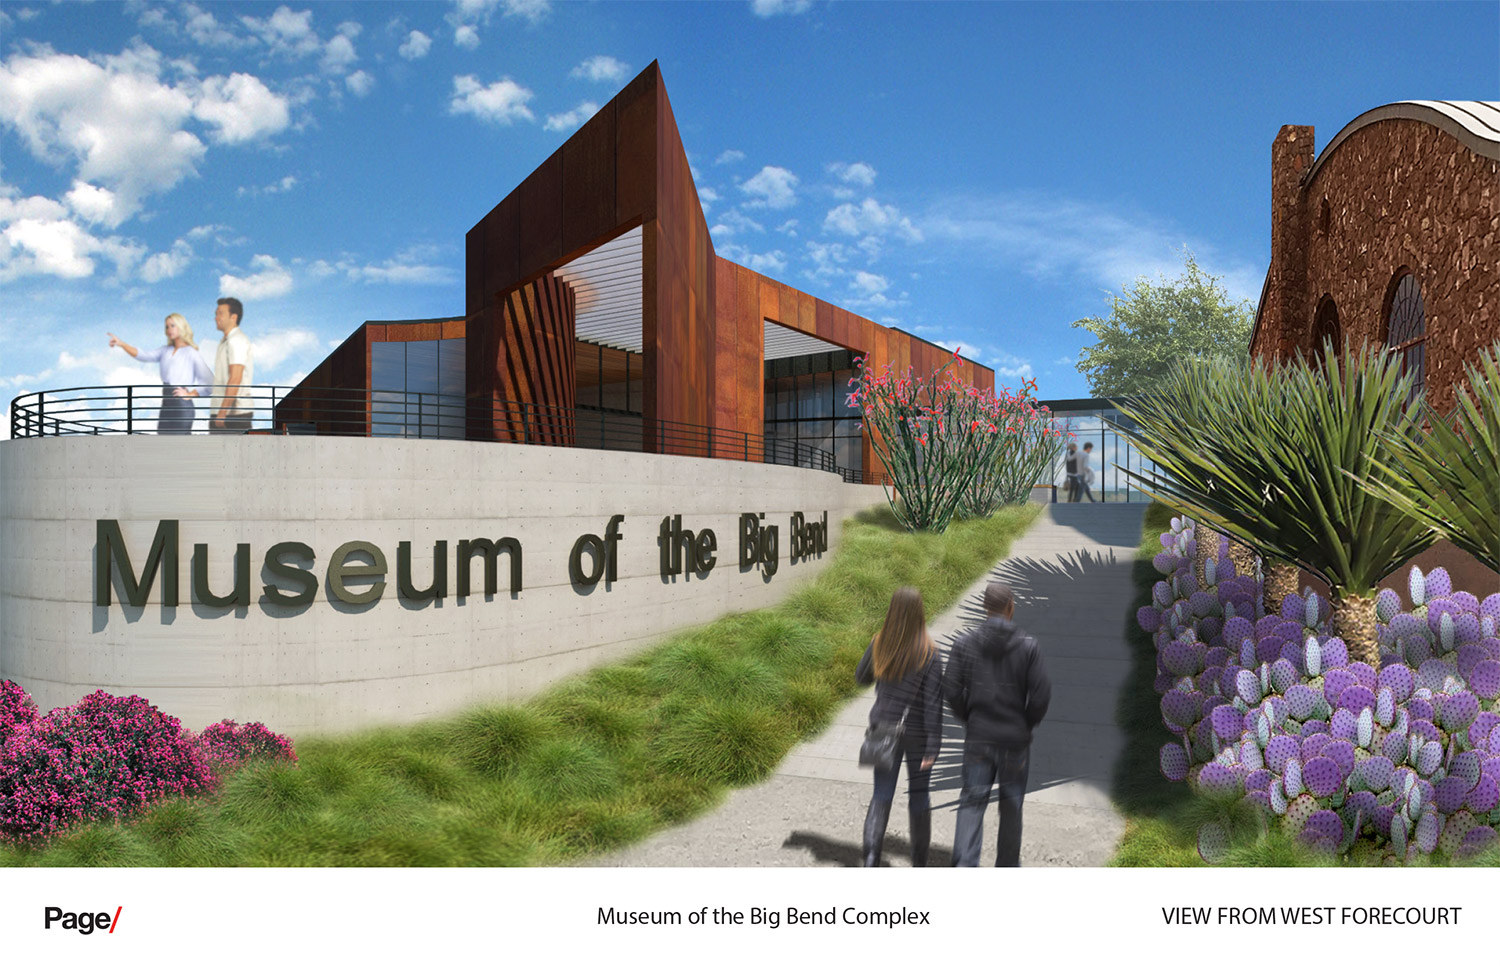 Architect's Renderings of the view of the Museum Complex from West Forecourt